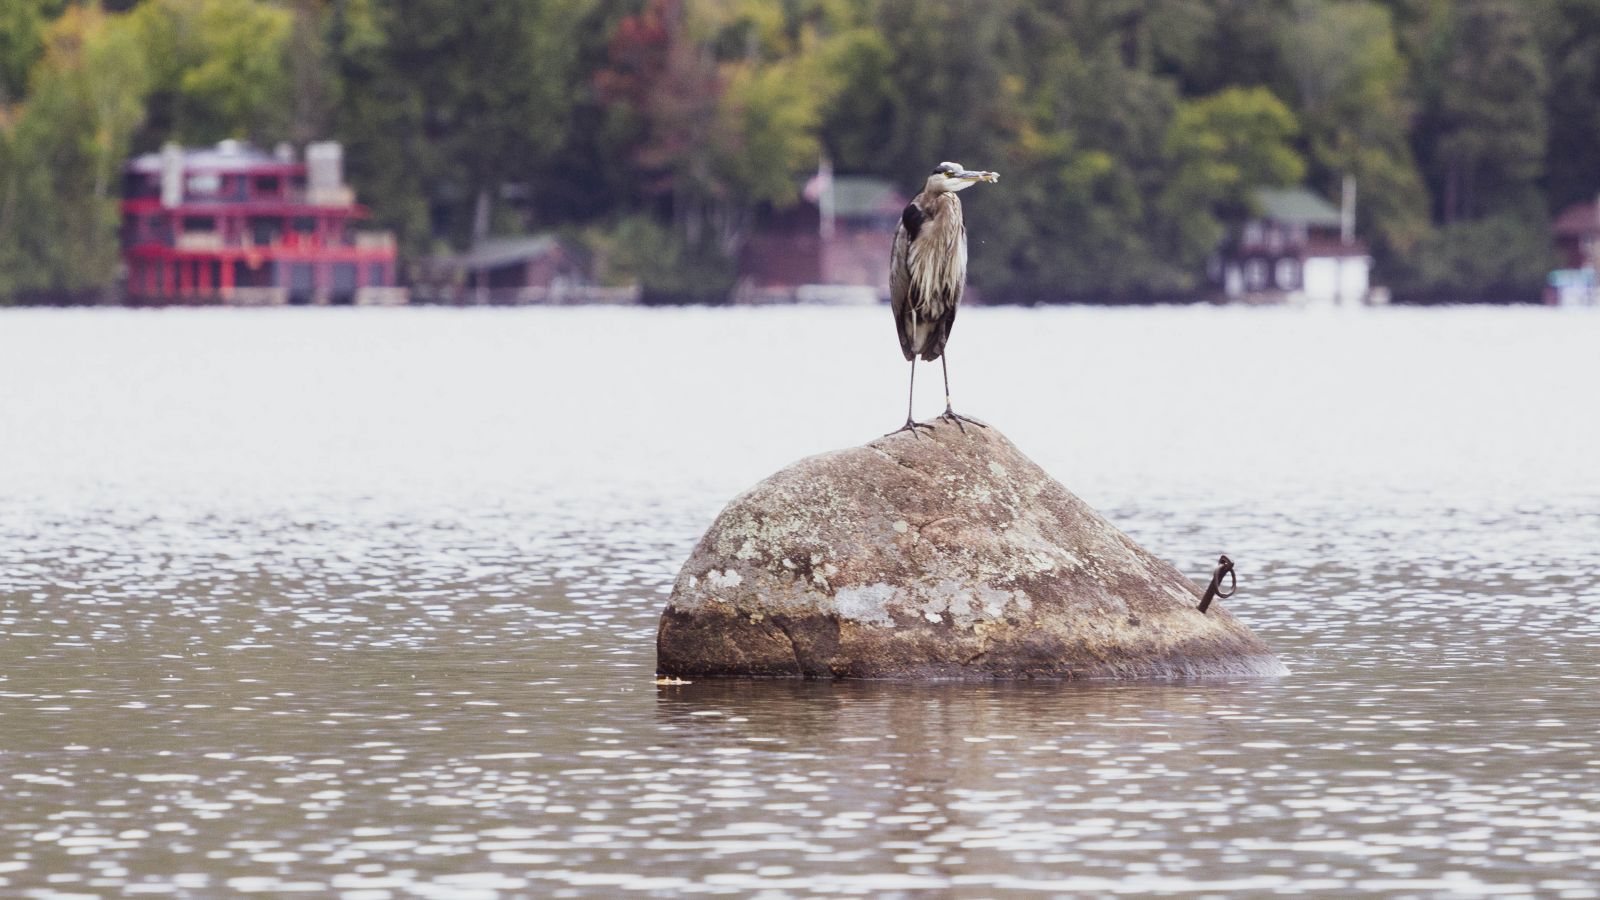 What a wonderful surprise this morning to get to see a Blue Heron hanging out at the lake.